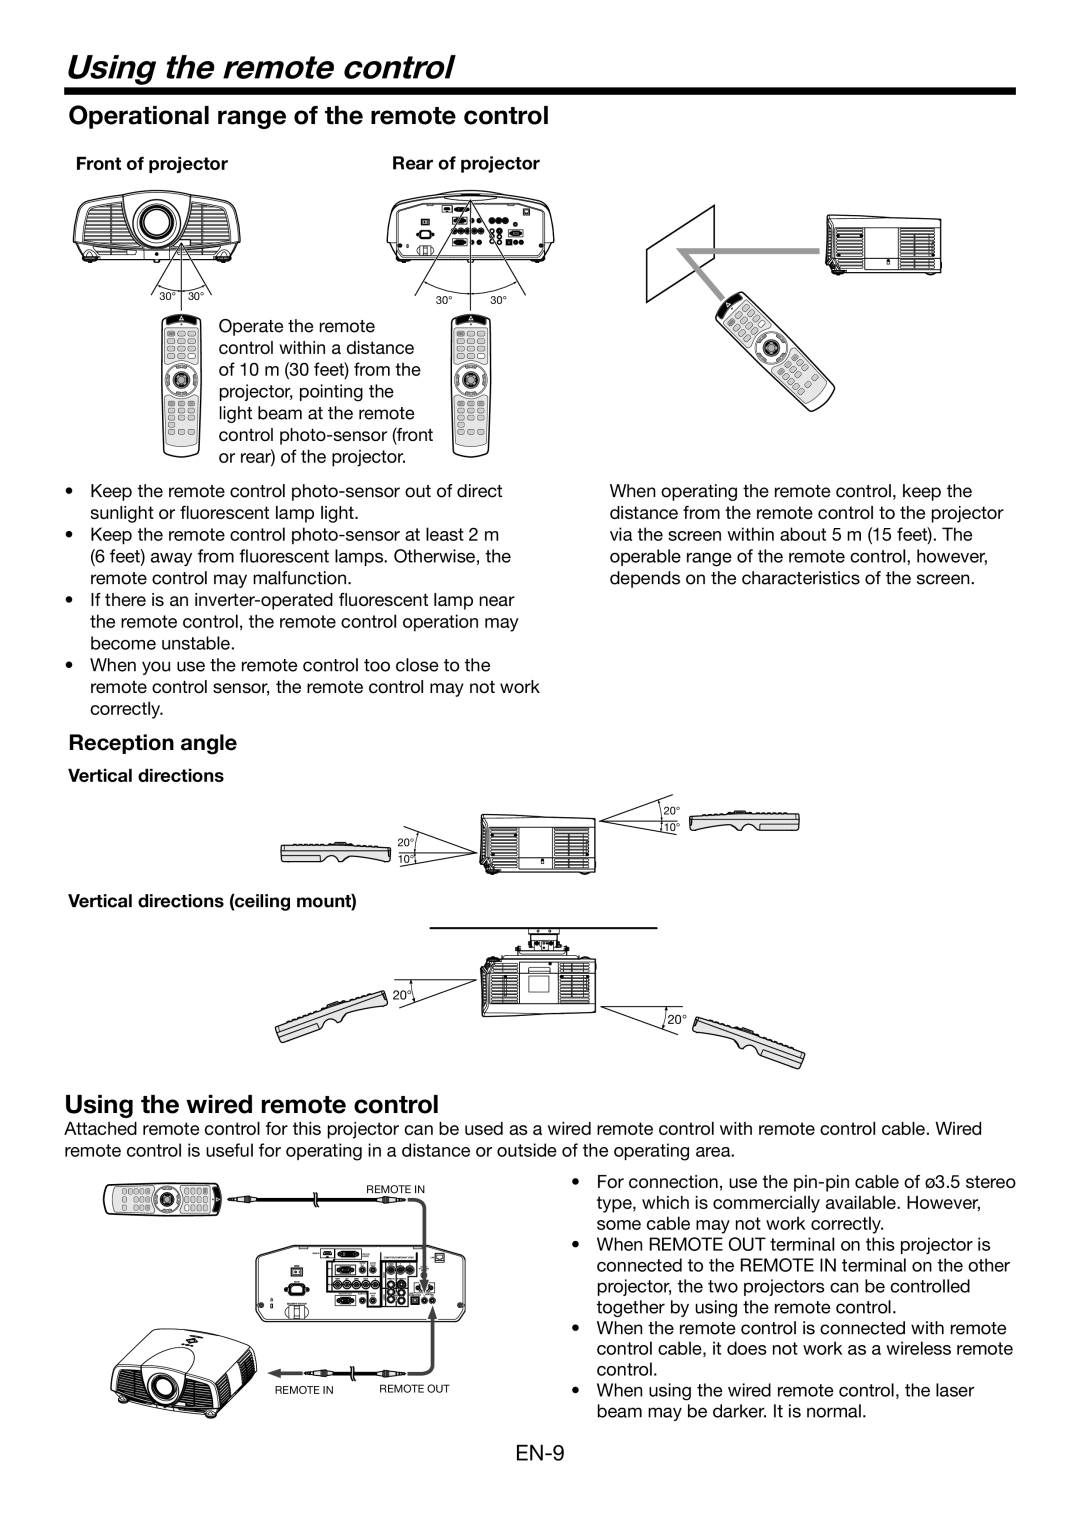 Mitsumi electronic WD3300U user manual Using the remote control, Operational range of the remote control, Reception angle 